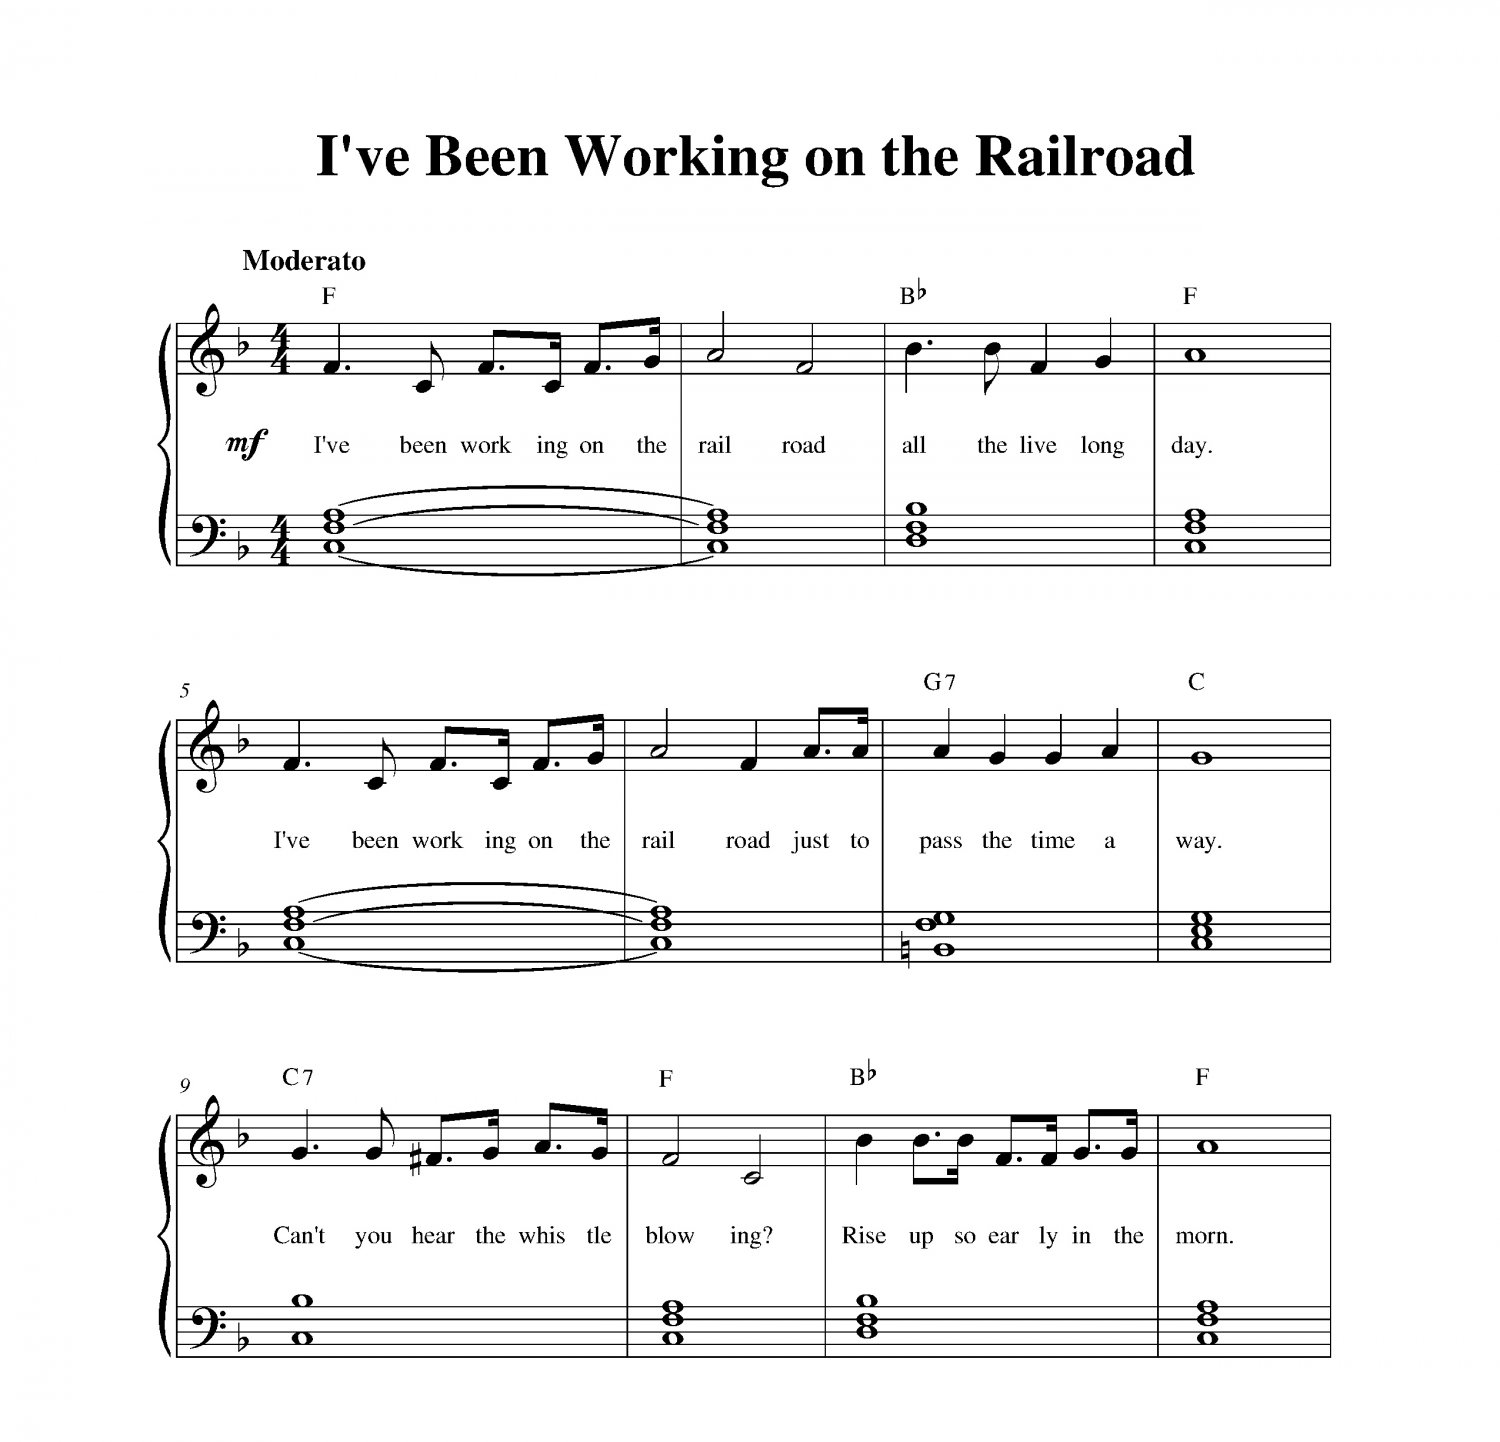 “I’ve Been Working on the Railroad” piano sheet music Early Intermediate Me...